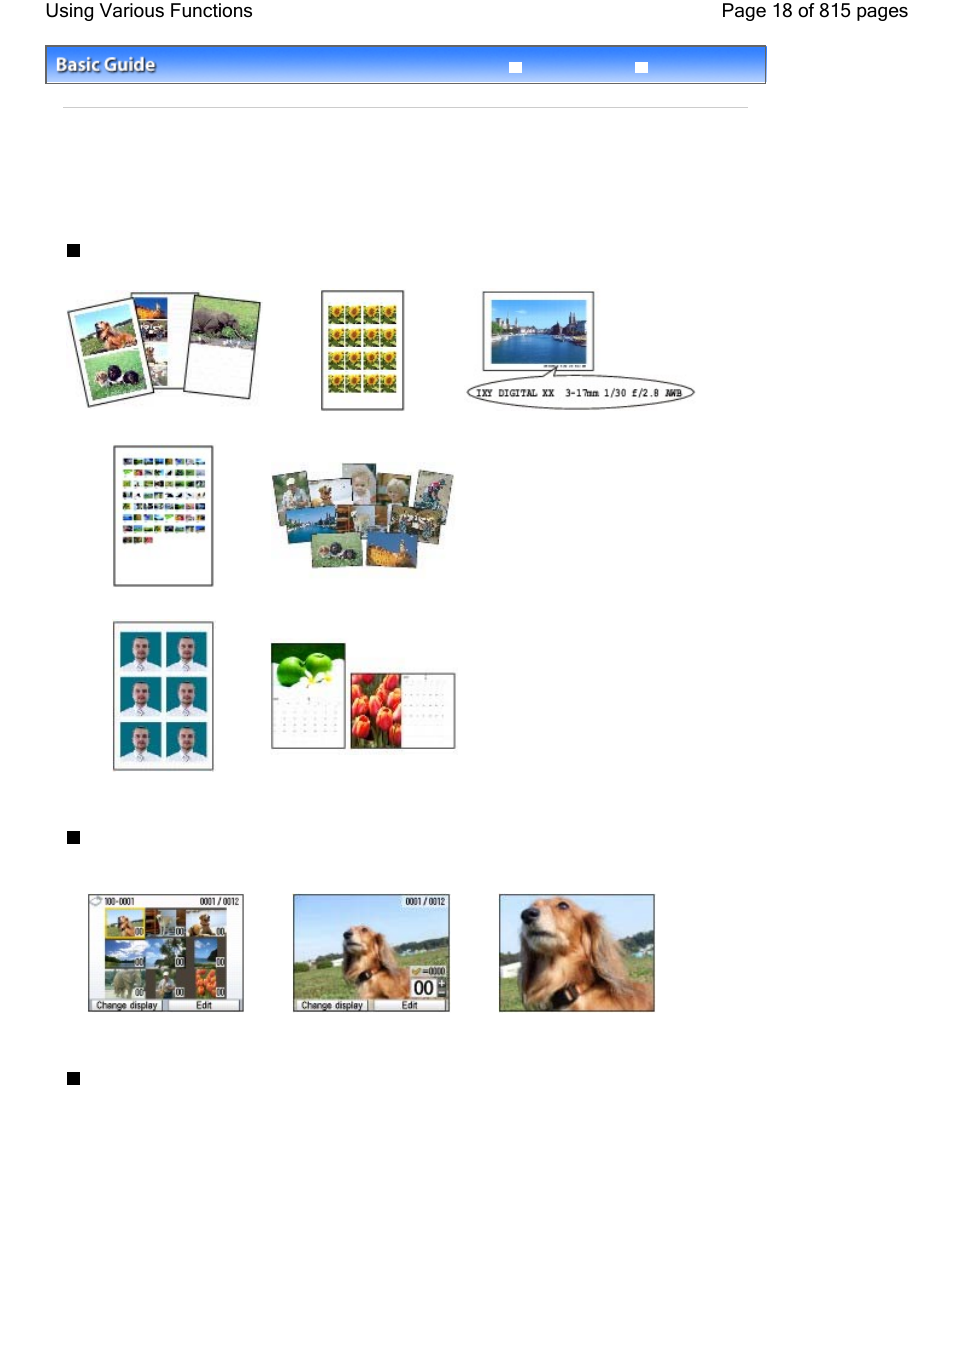 Using various functions, Printing photos in various layouts, Changing